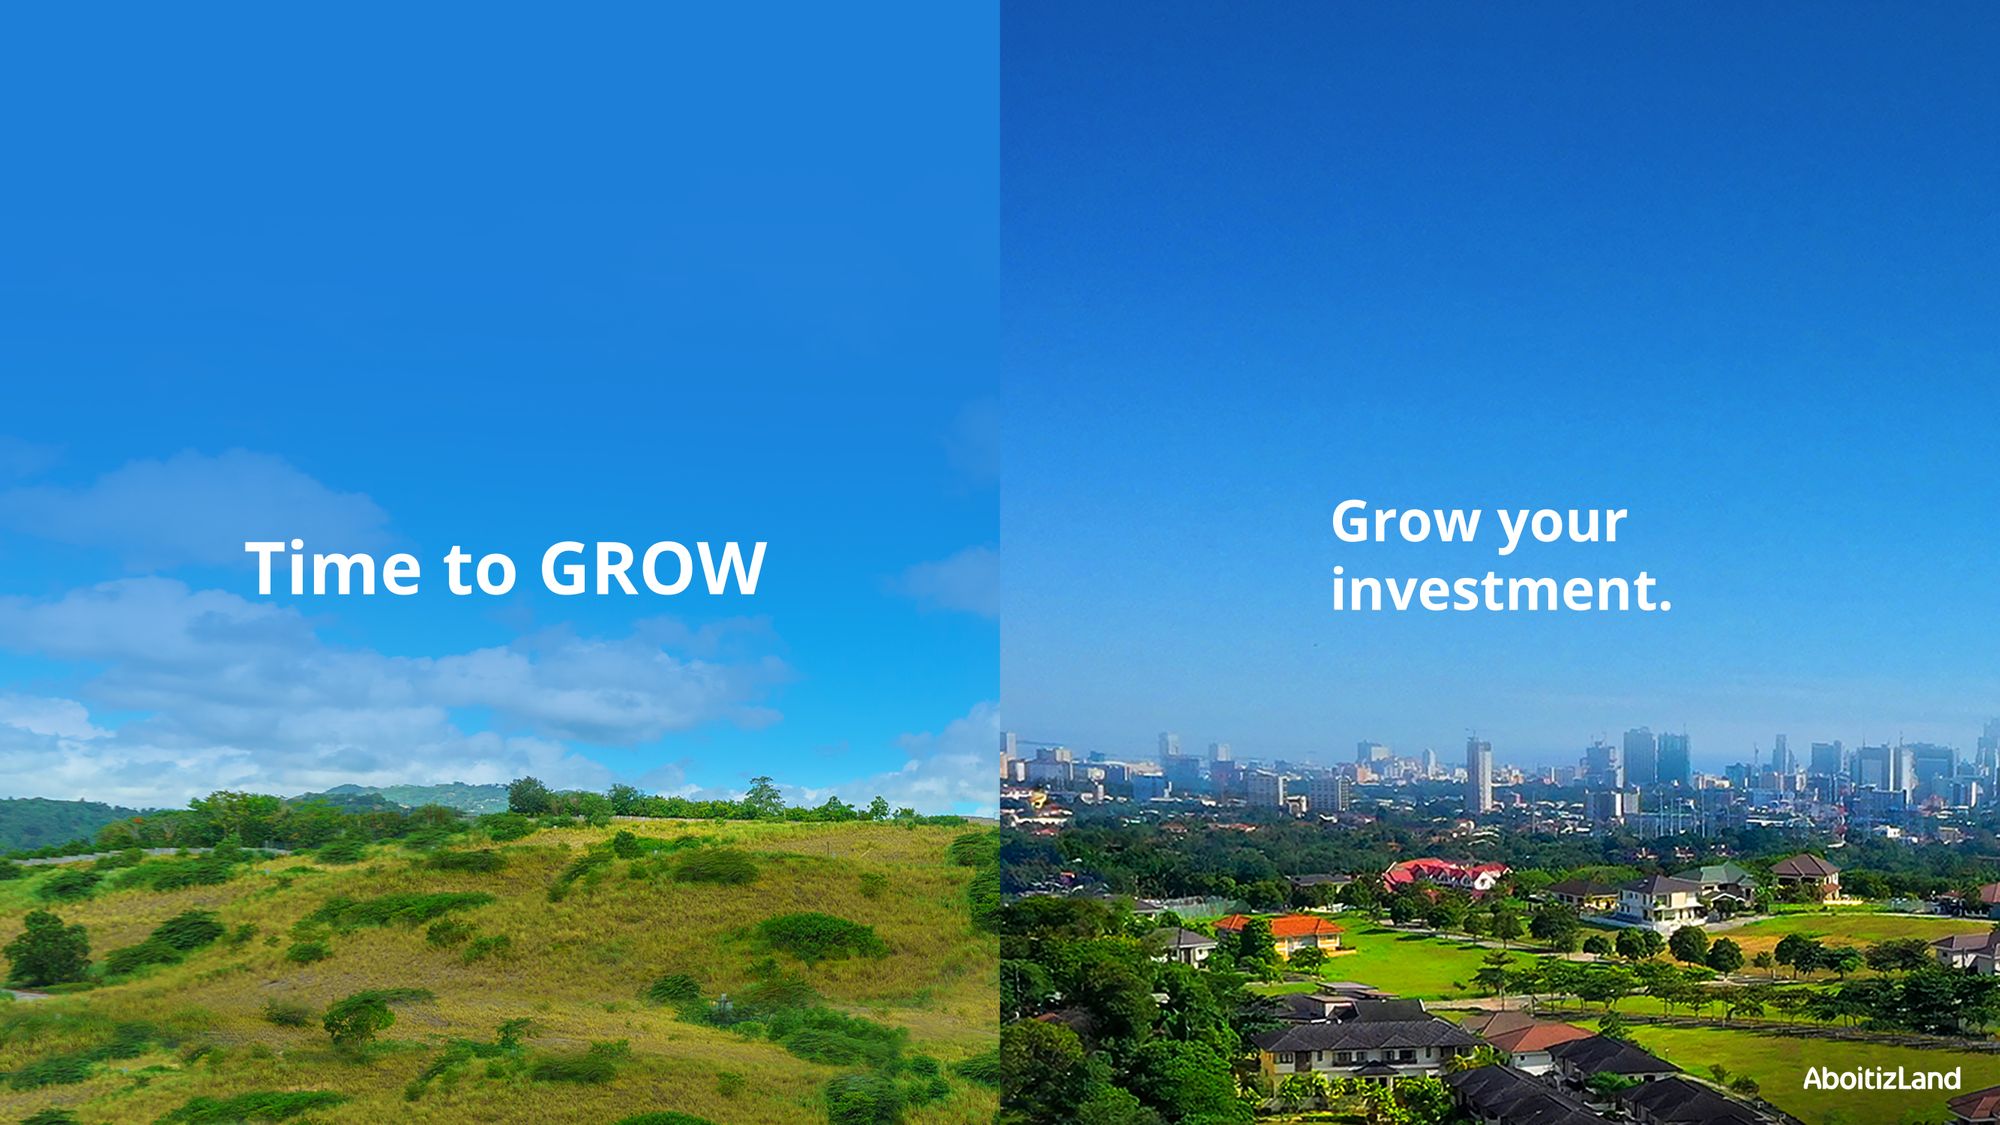 New Goals For The New Normal: Grow Your Investment With AboitizLand